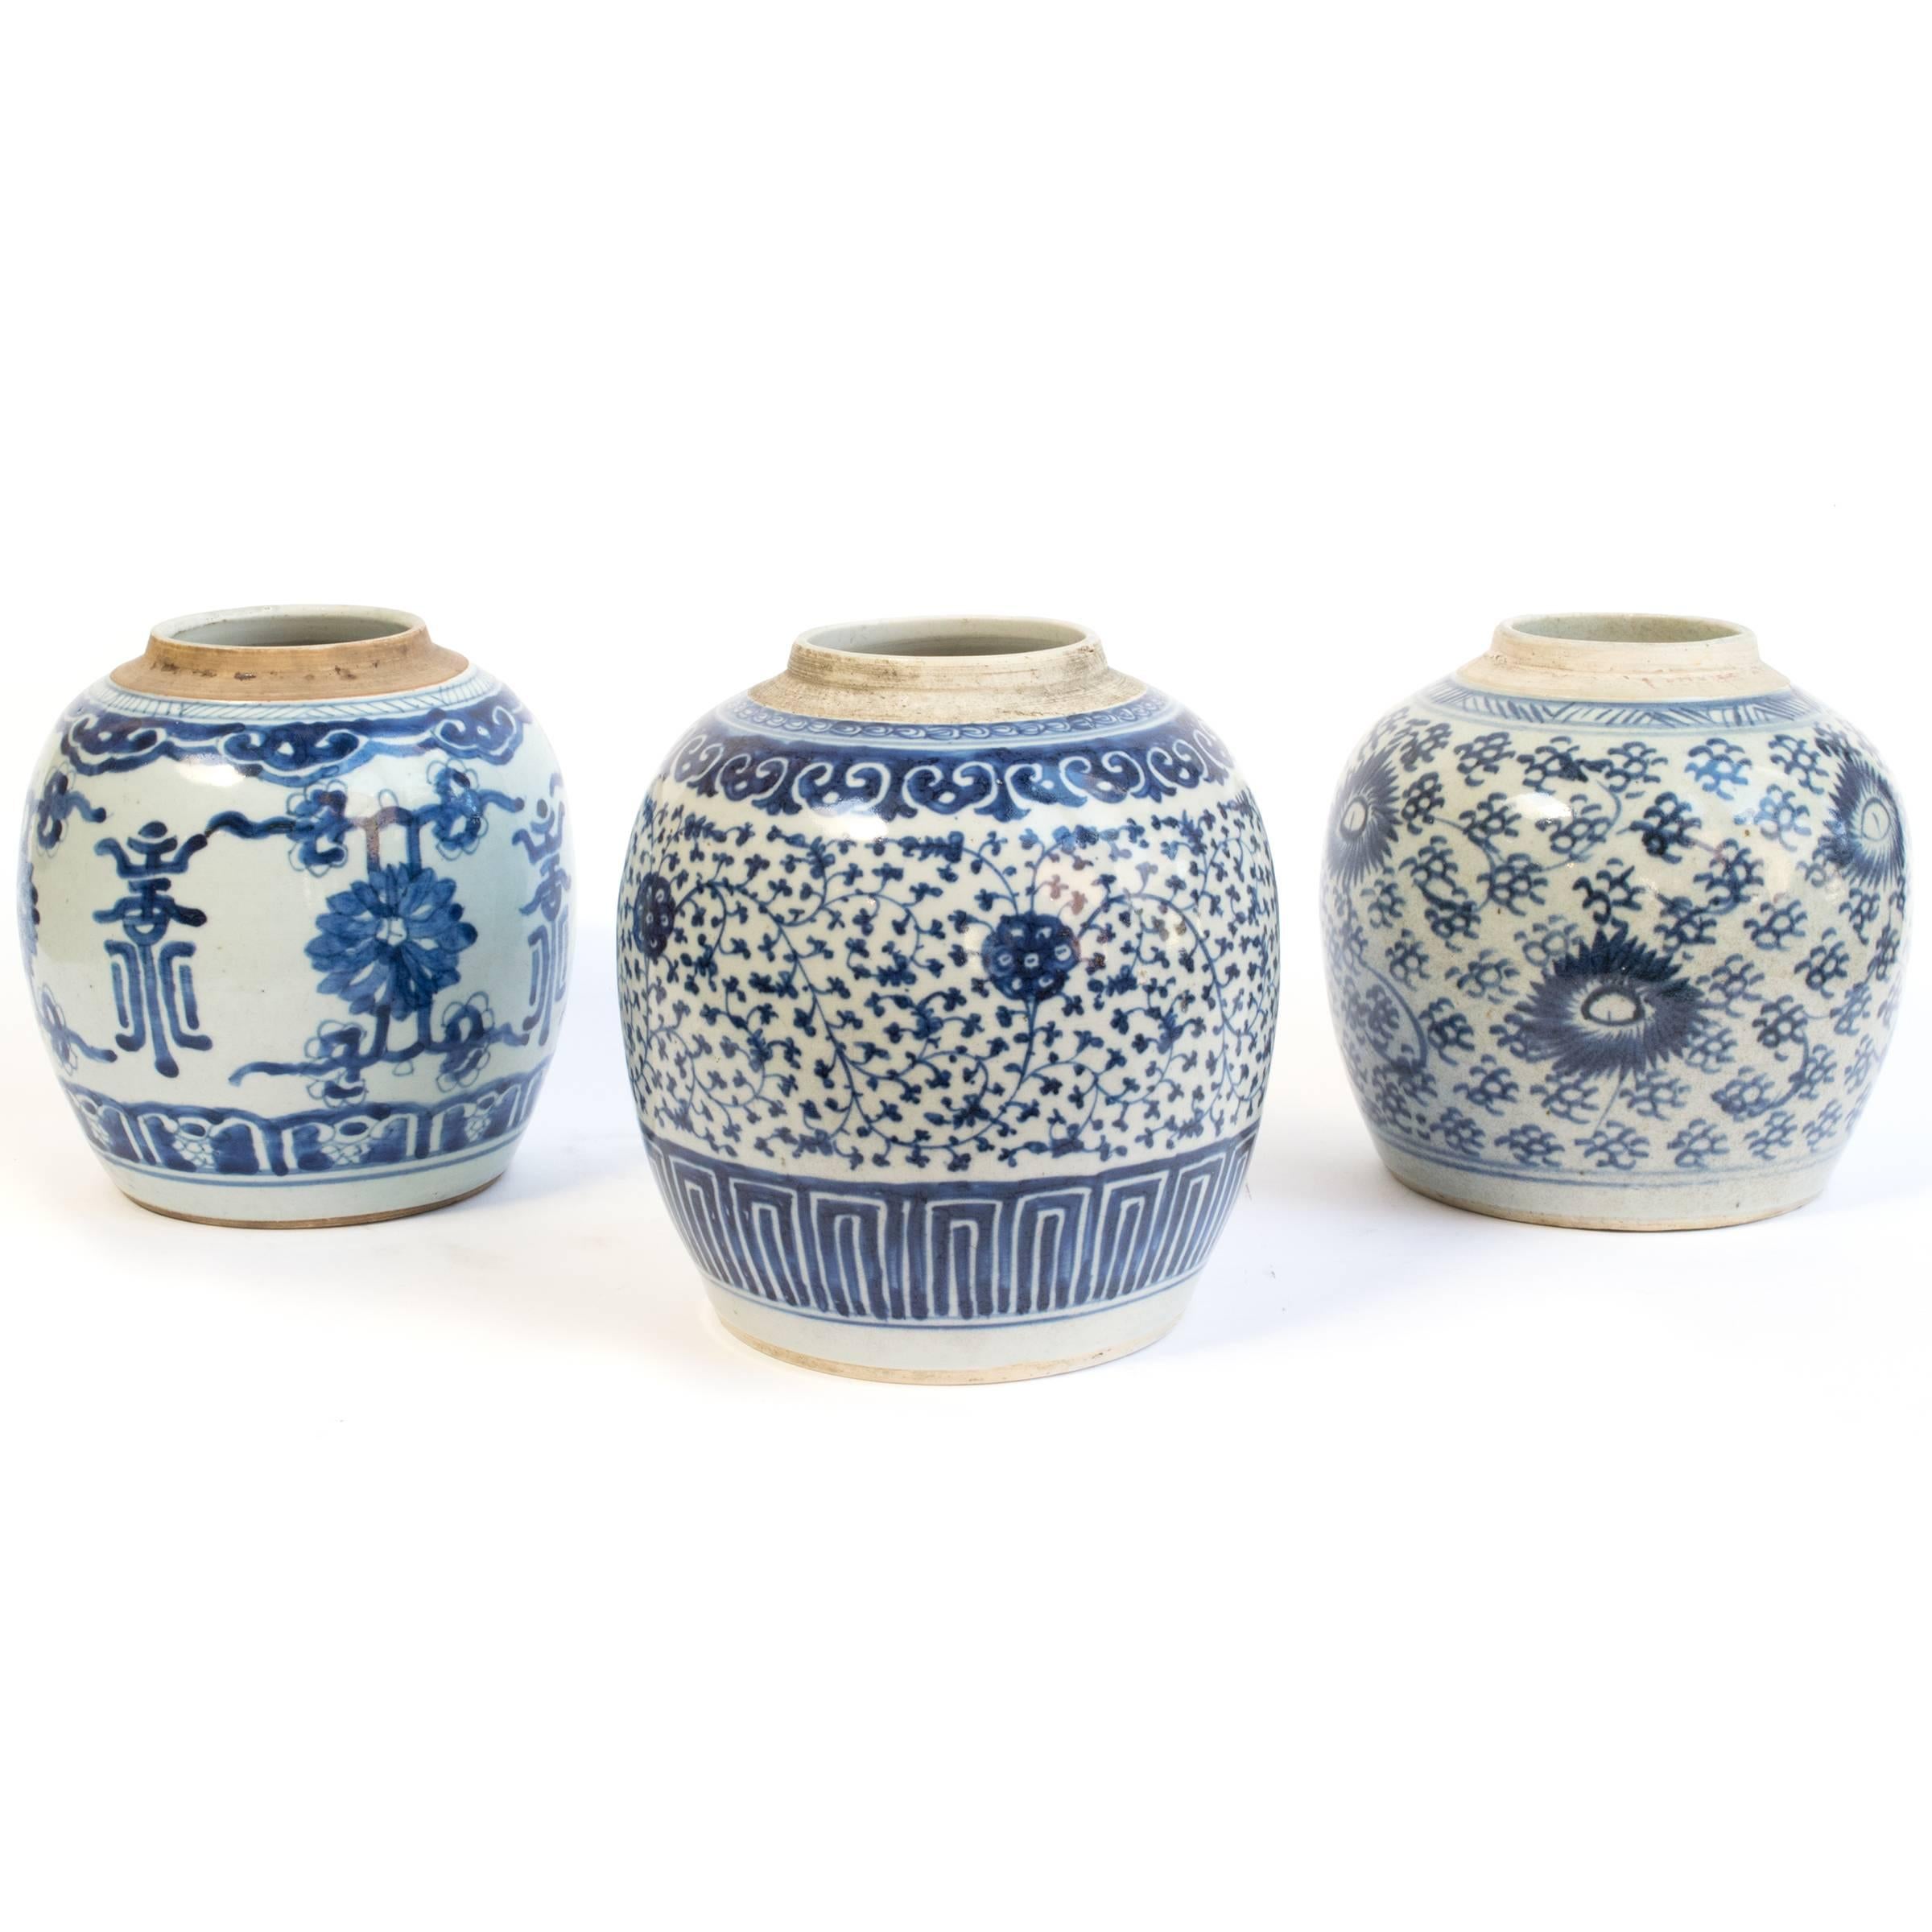 These elegant porcelain jars, in forms often called ginger jars, were originally intended to hold spices. Each has a traditional blue and white floral design, elegantly painted by a 19th century skilled artisan. The jars became popular decorative